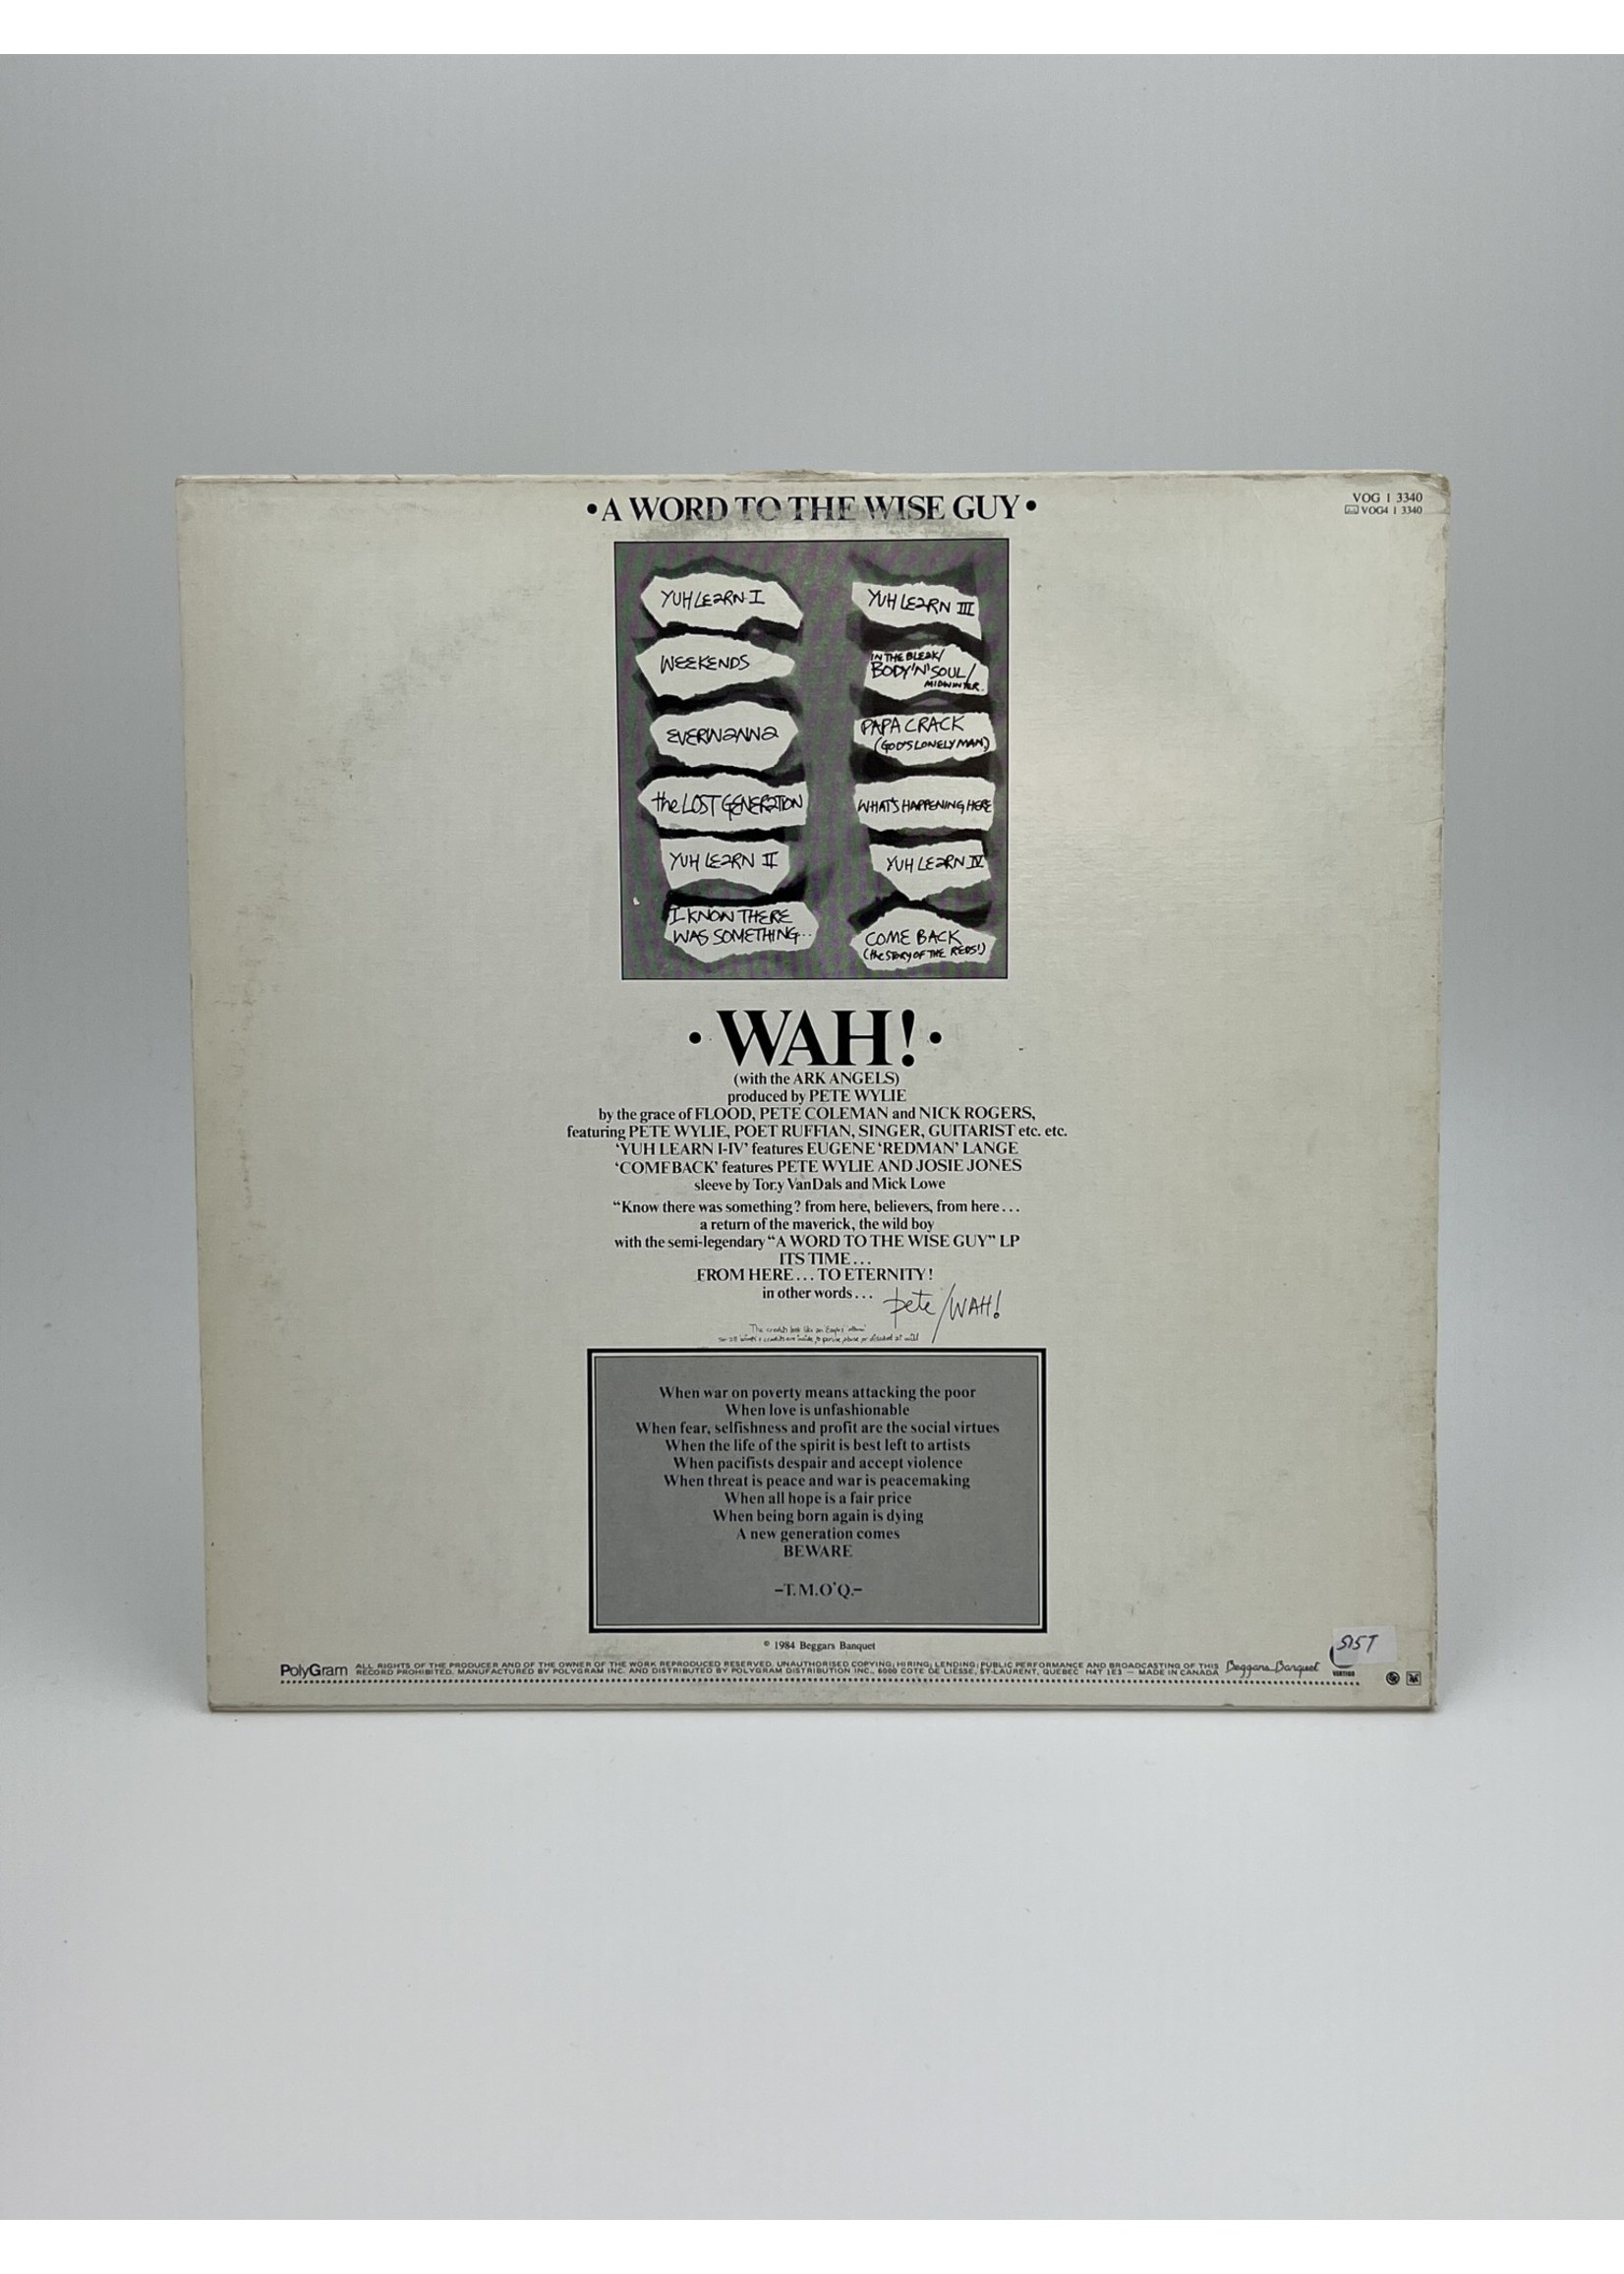 LP Wah A Word To The Wise Guy LP Record